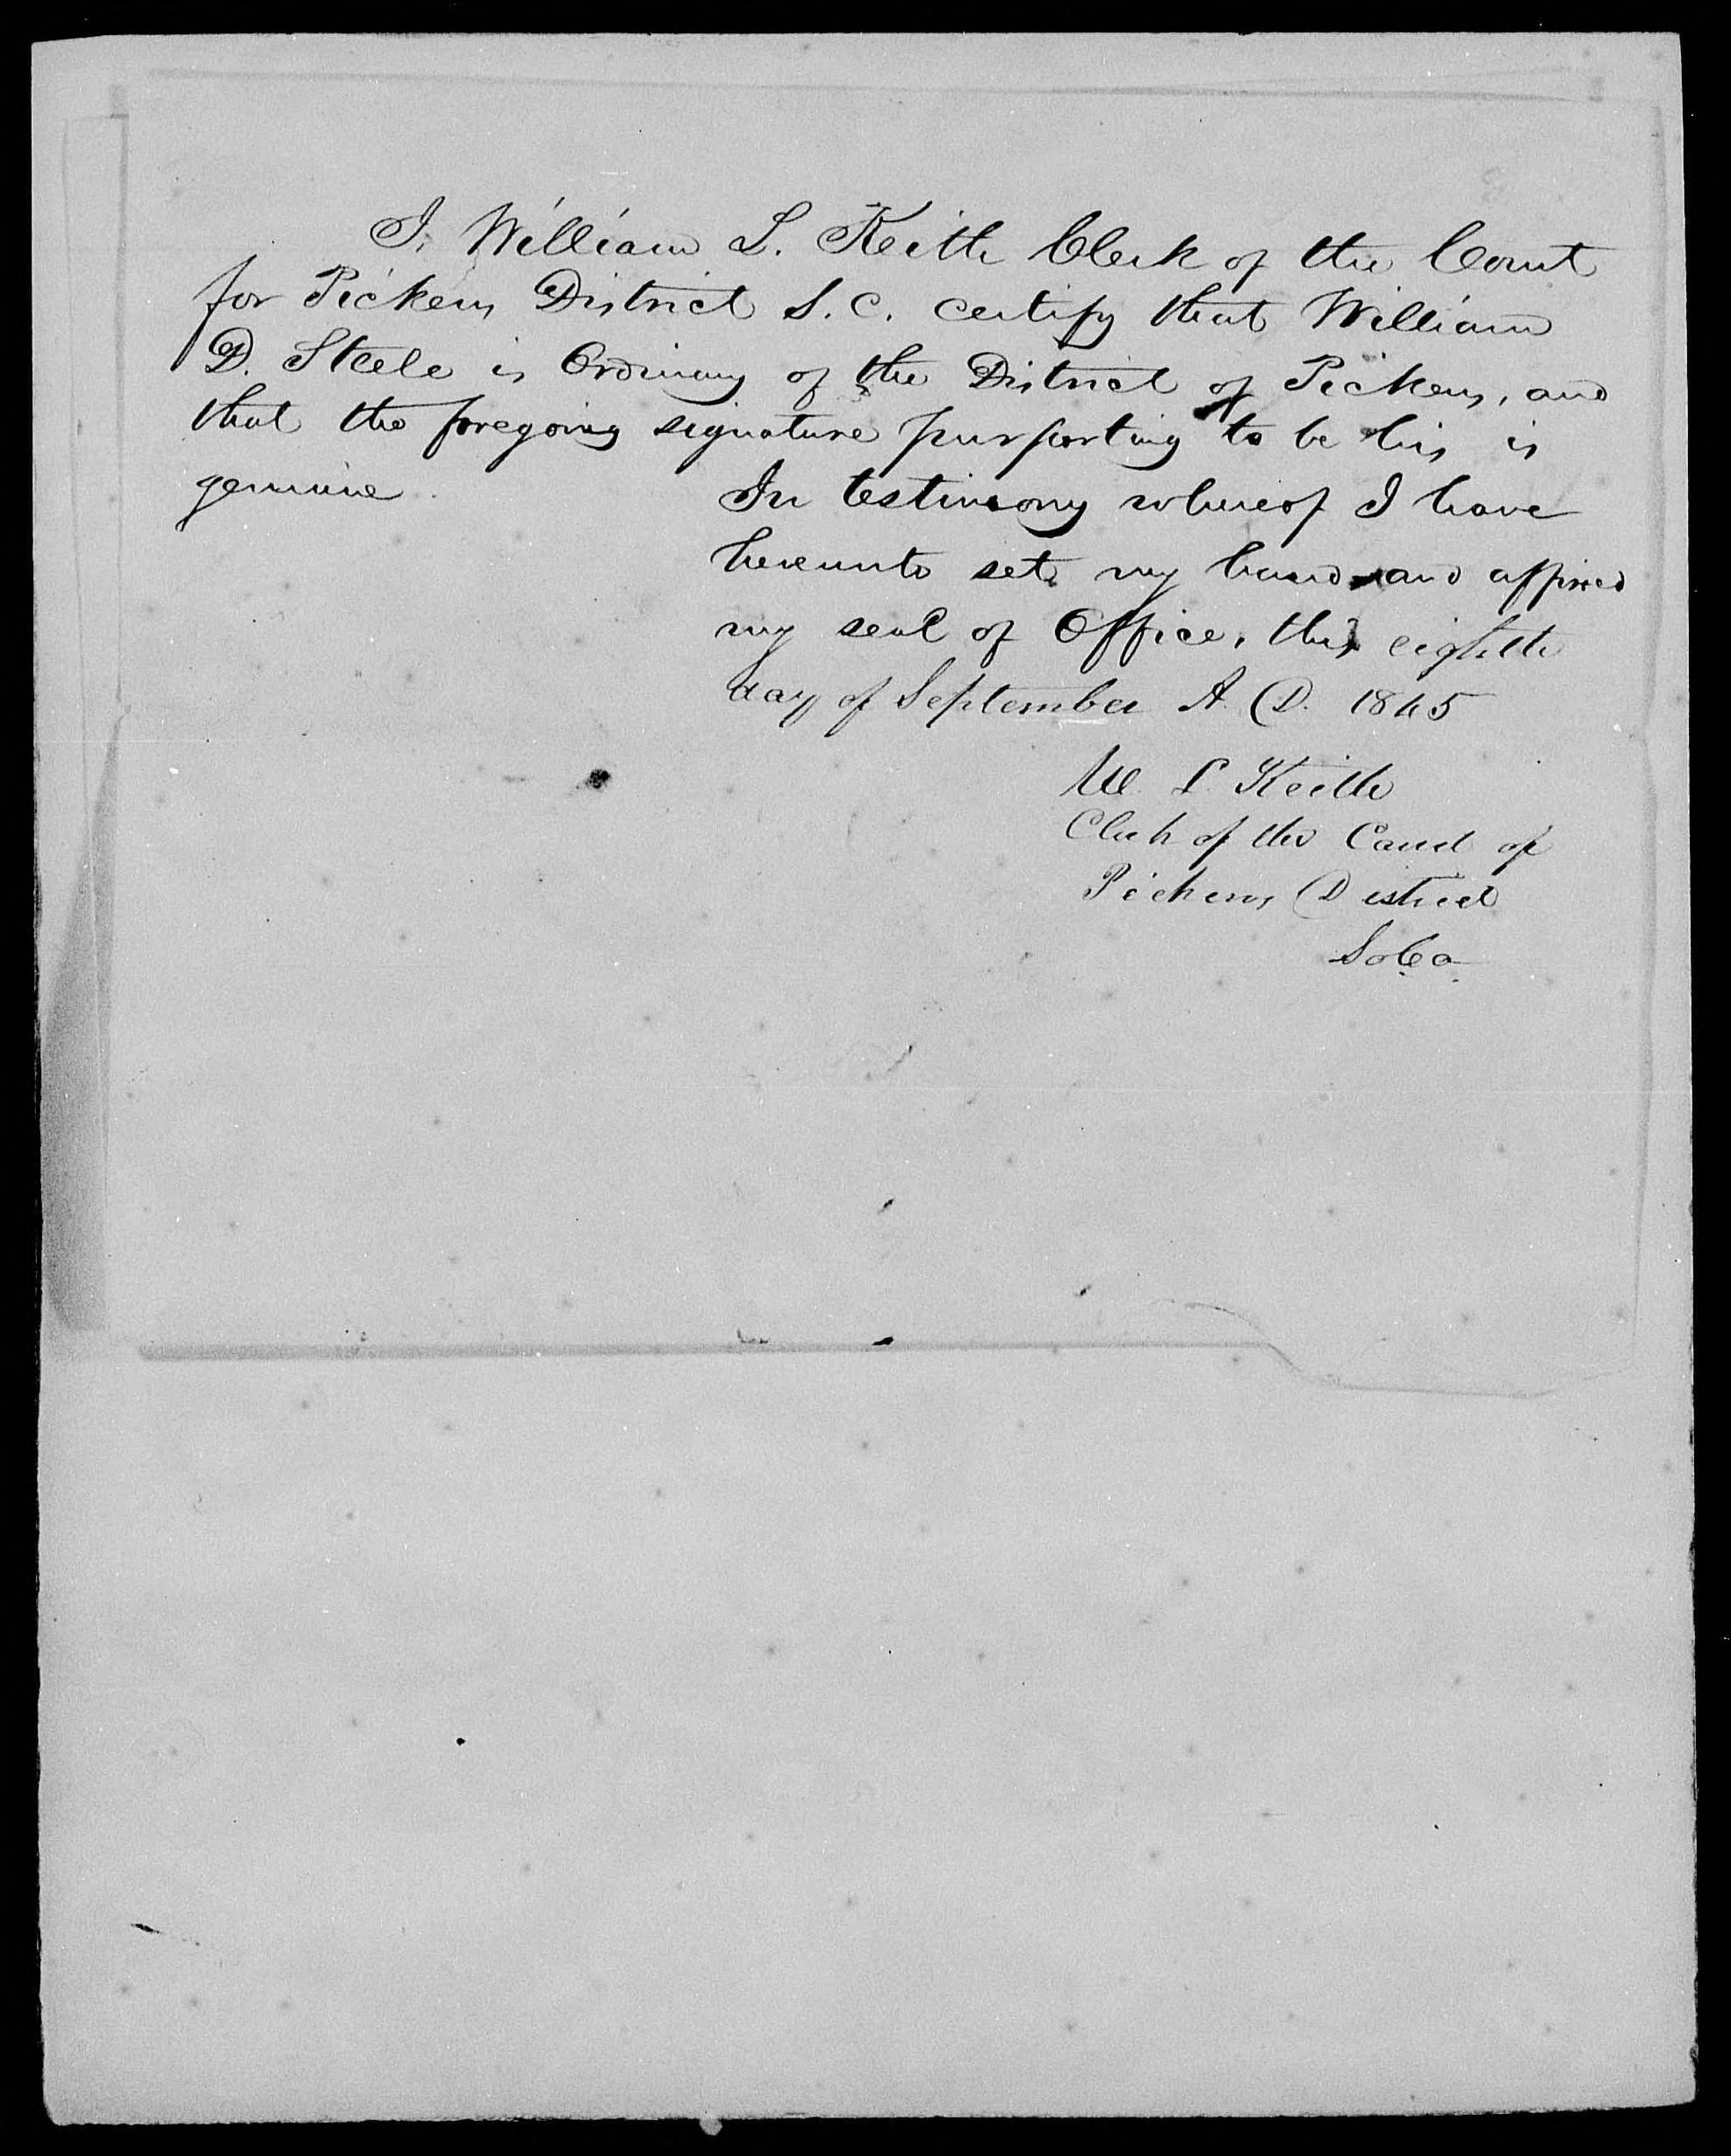 Application for a Widow's Pension from Anna Guest, 4 September 1845, page 3